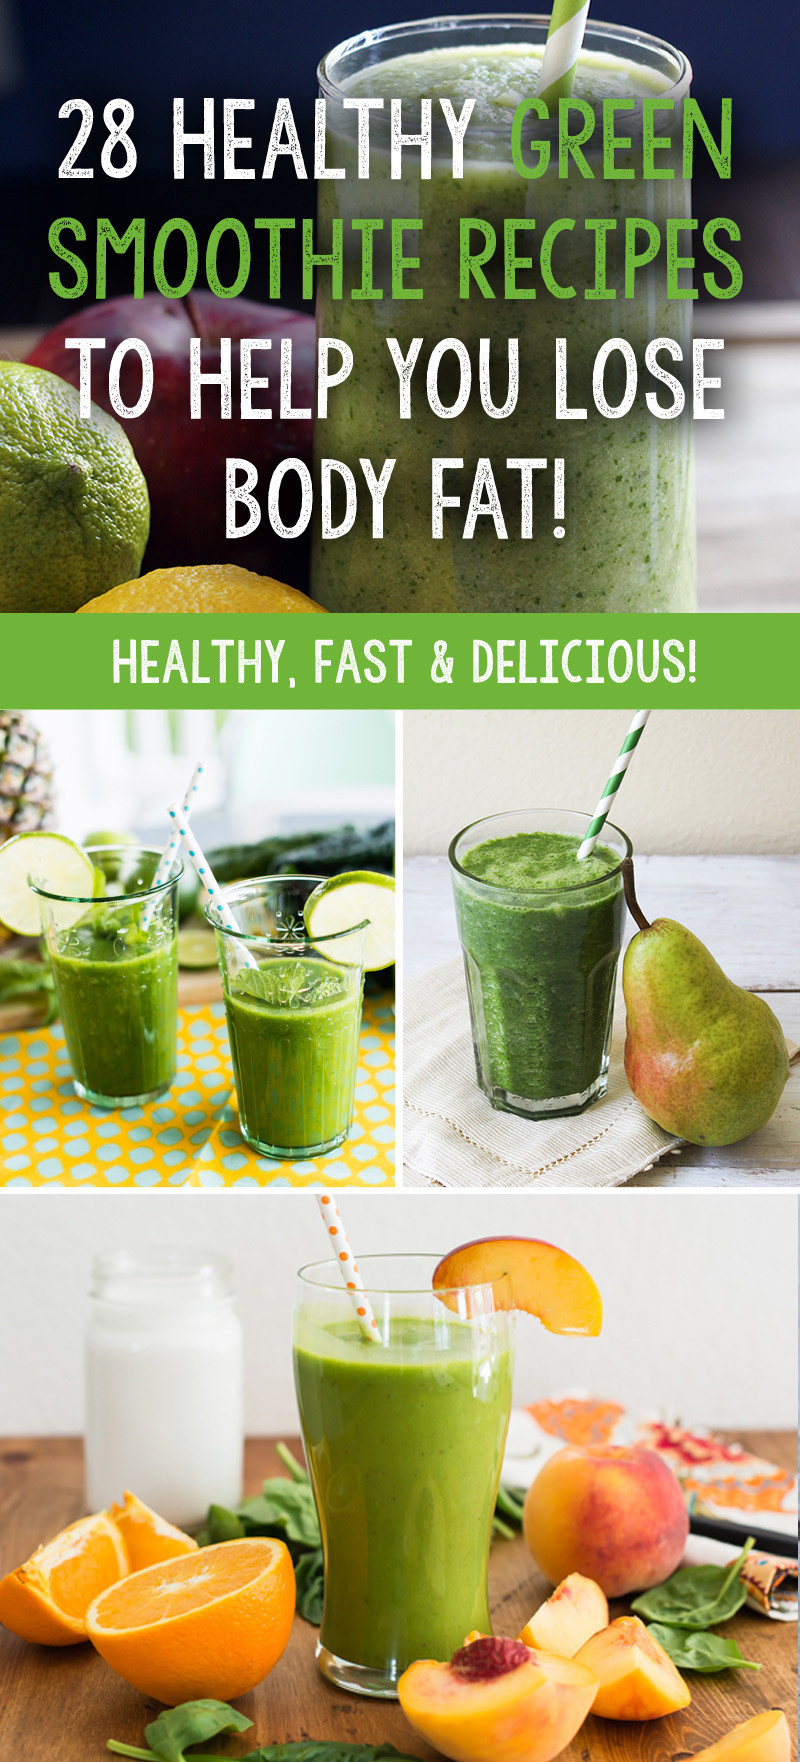 Smoothie Healthy Recipes
 28 Healthy Green Smoothie Recipes To Help You Lose Body Fat